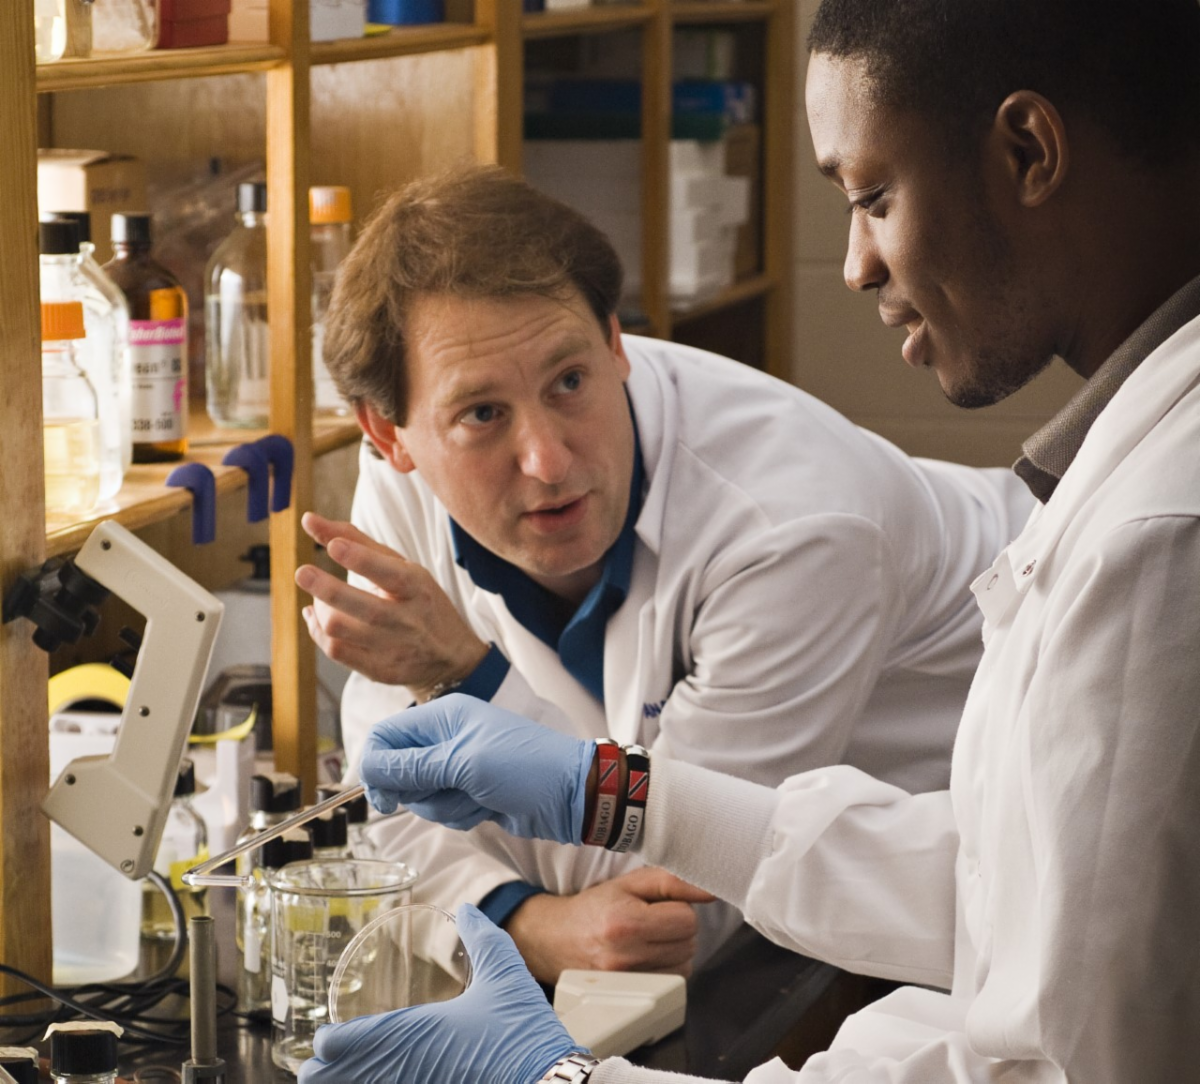 Claflin University professor Dr. Nicholas Panasik conducts research with a student in the lab.